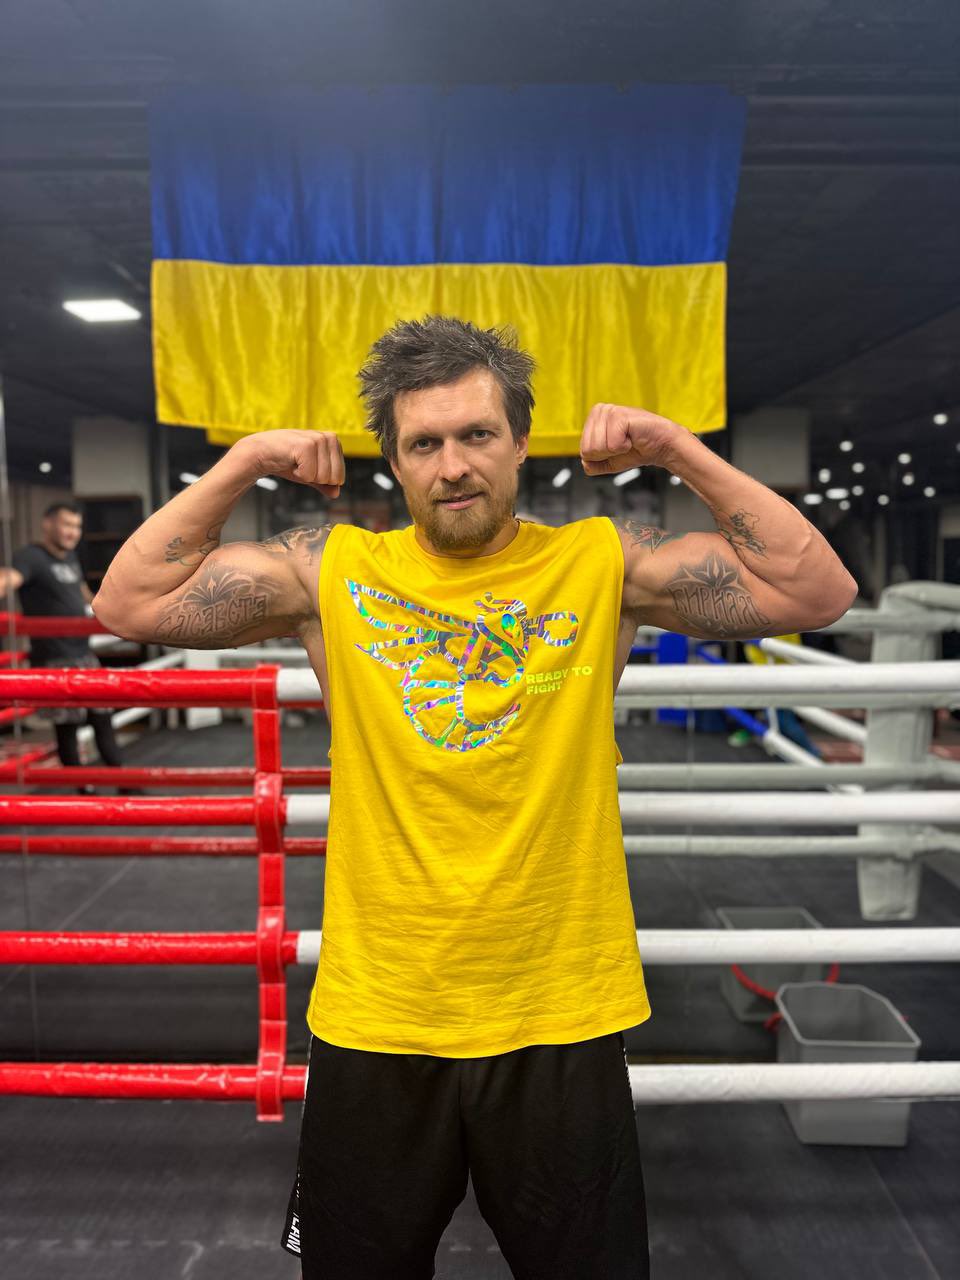 I'm here - Oleksandr Uzyk exaggerates his muscles while calling out Tyson Fury, who is posing in front the Ukraine flag